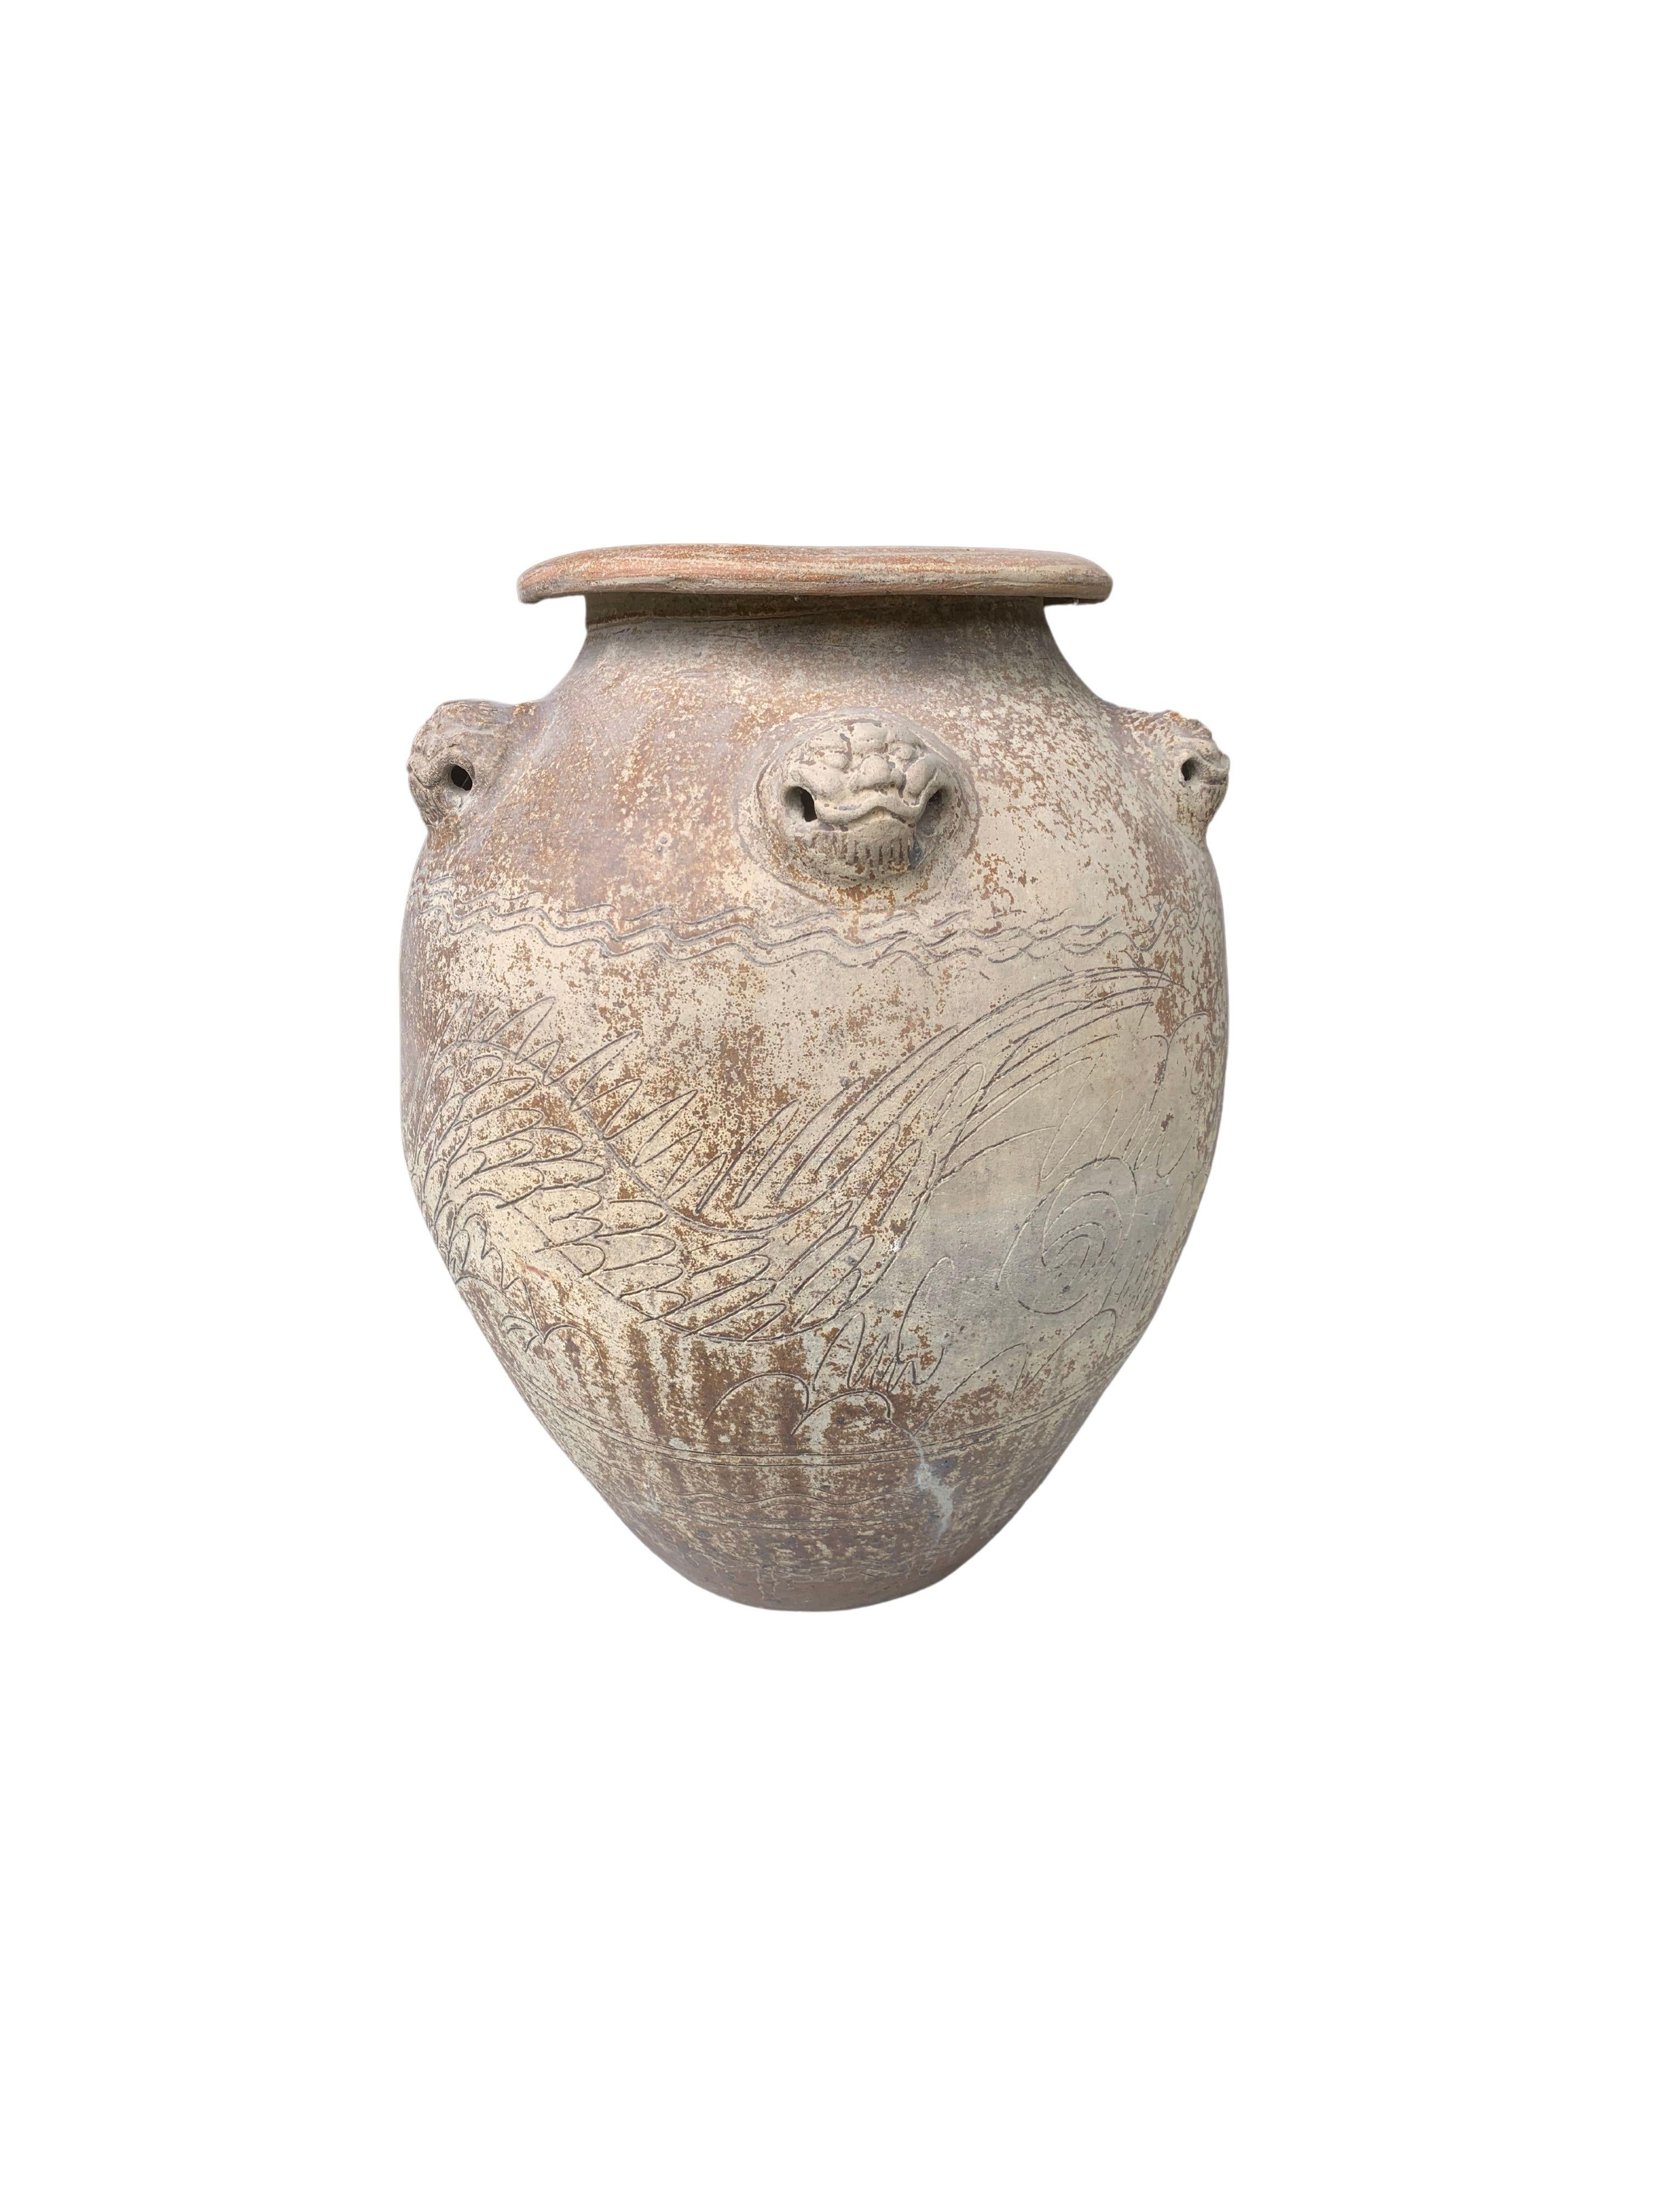 Qing Chinese Earth Coloured Ceramic Jar / Planter with Tiger Medallions, c. 1900 For Sale